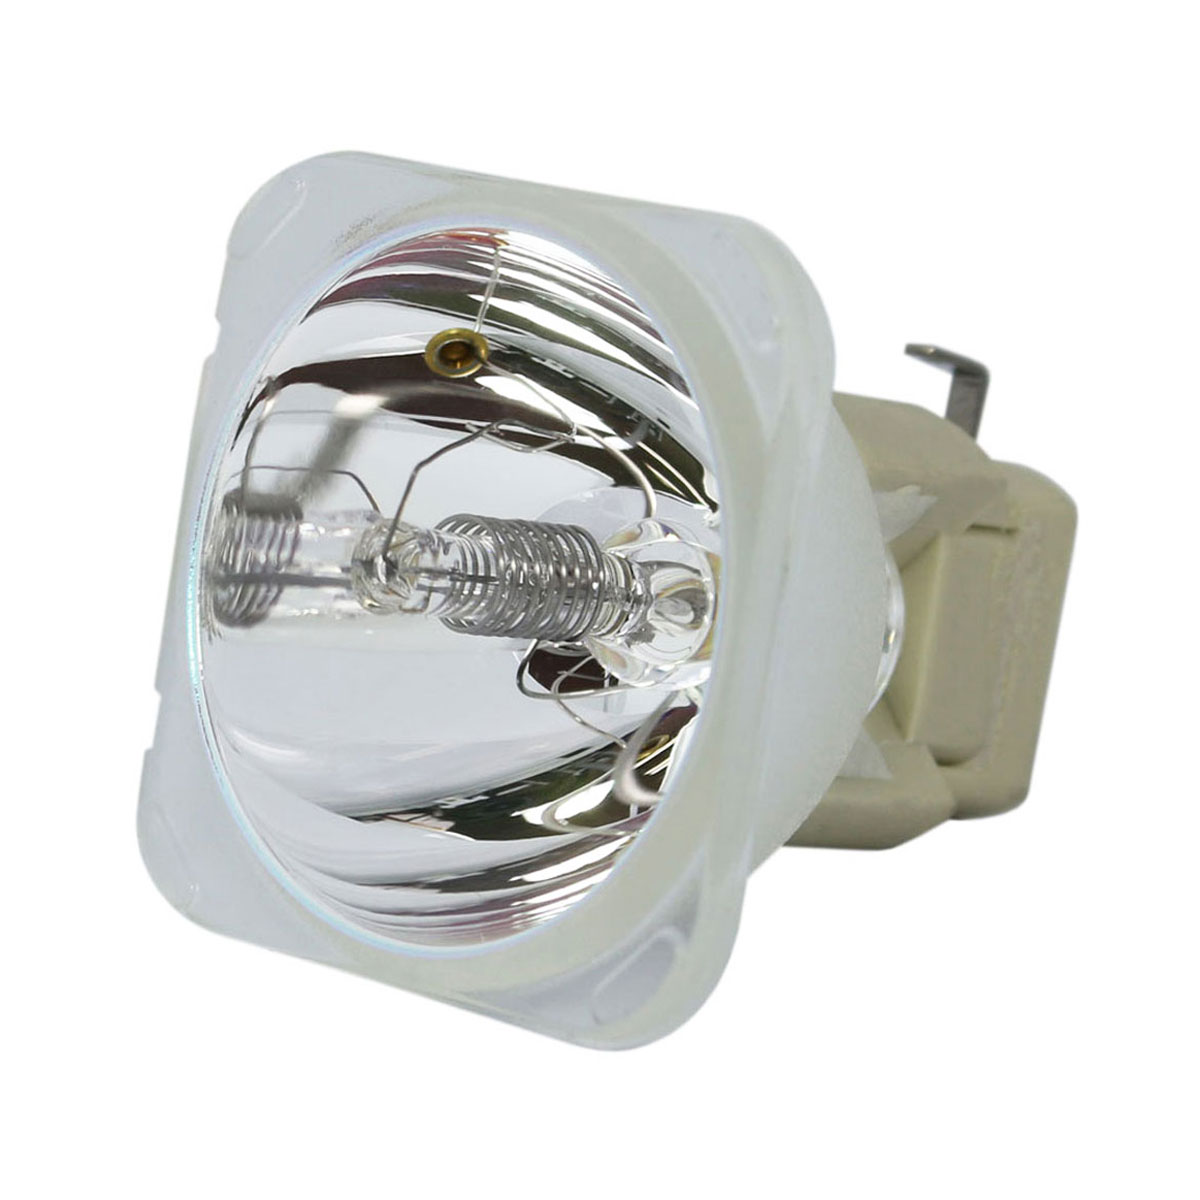 Original Osram Projector Lamp Replacement for BenQ 5J.J4R05.001 (Bulb Only) - image 1 of 6